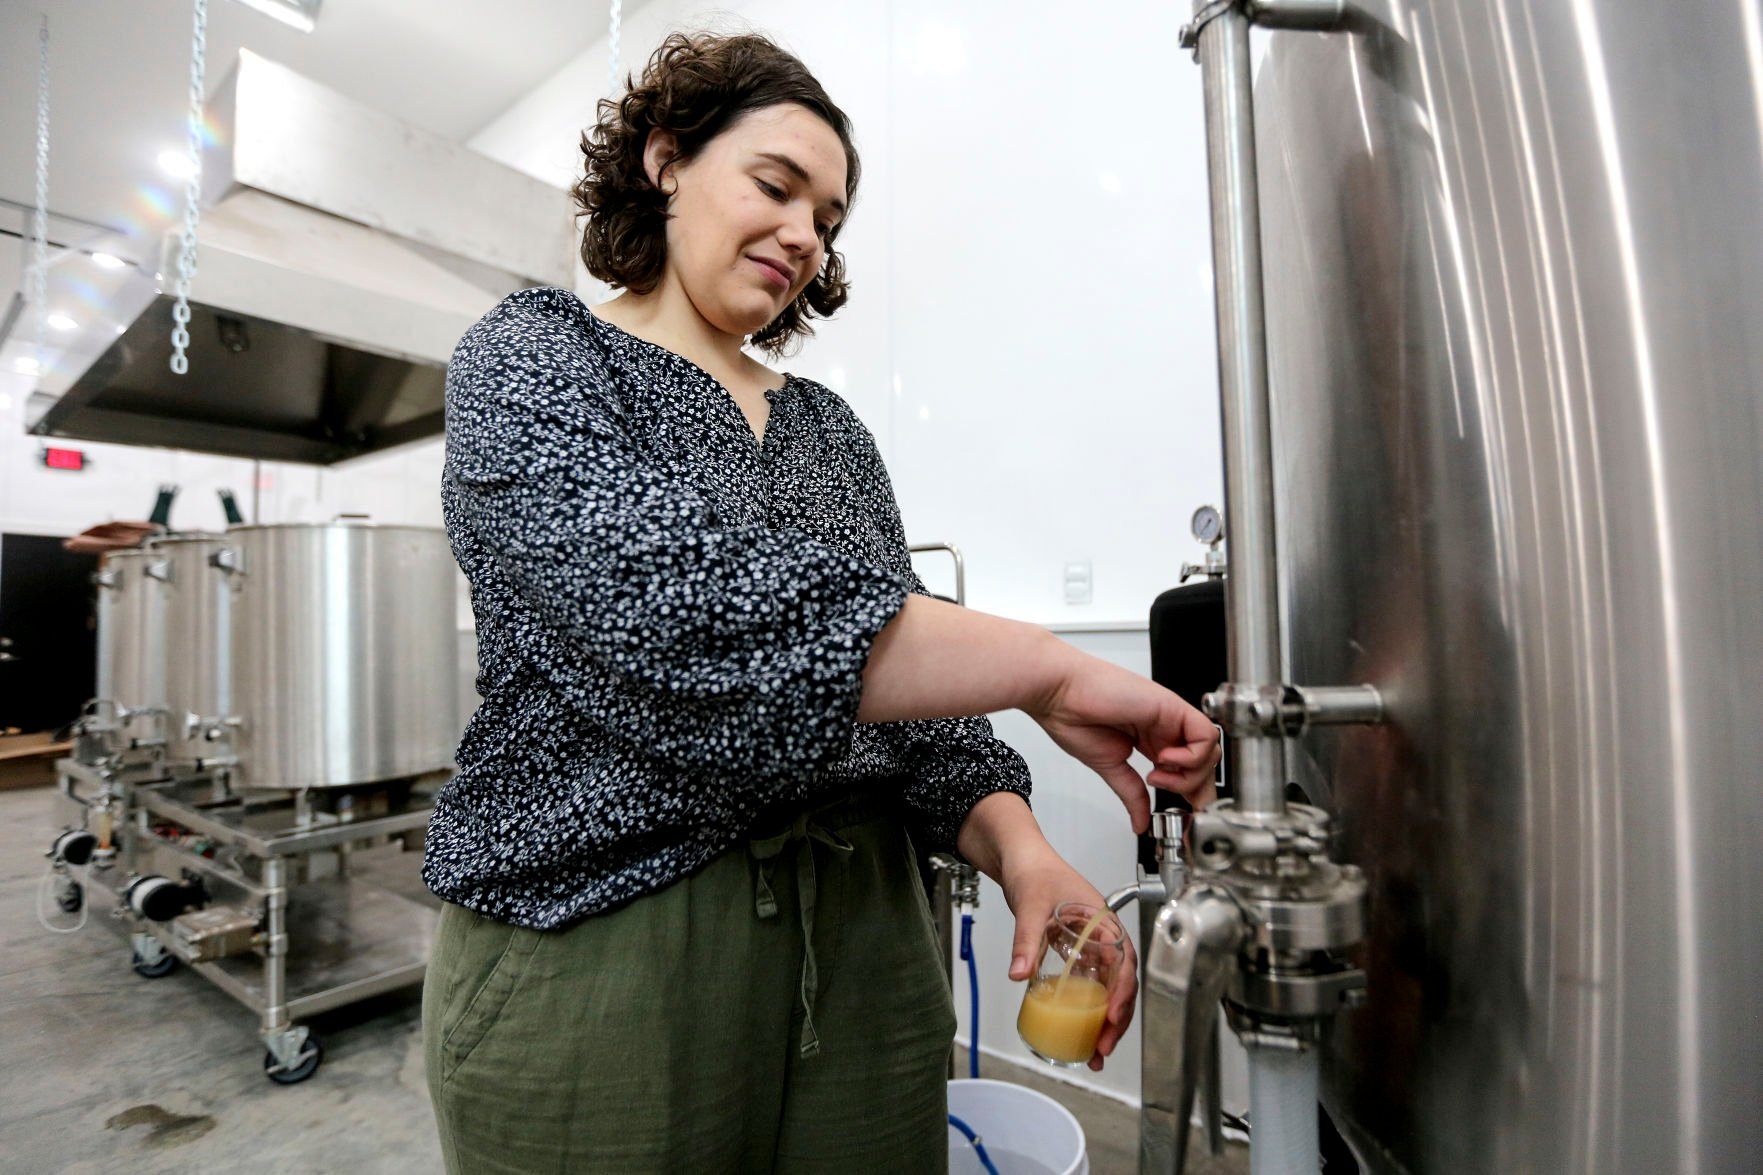 Kathryn Klaes who owns and operates Guttenberg (Iowa) Brewing Co., which soon will open, collects a sample beer to be tested on Wednesday, May 25, 2022.    PHOTO CREDIT: Dave Kettering